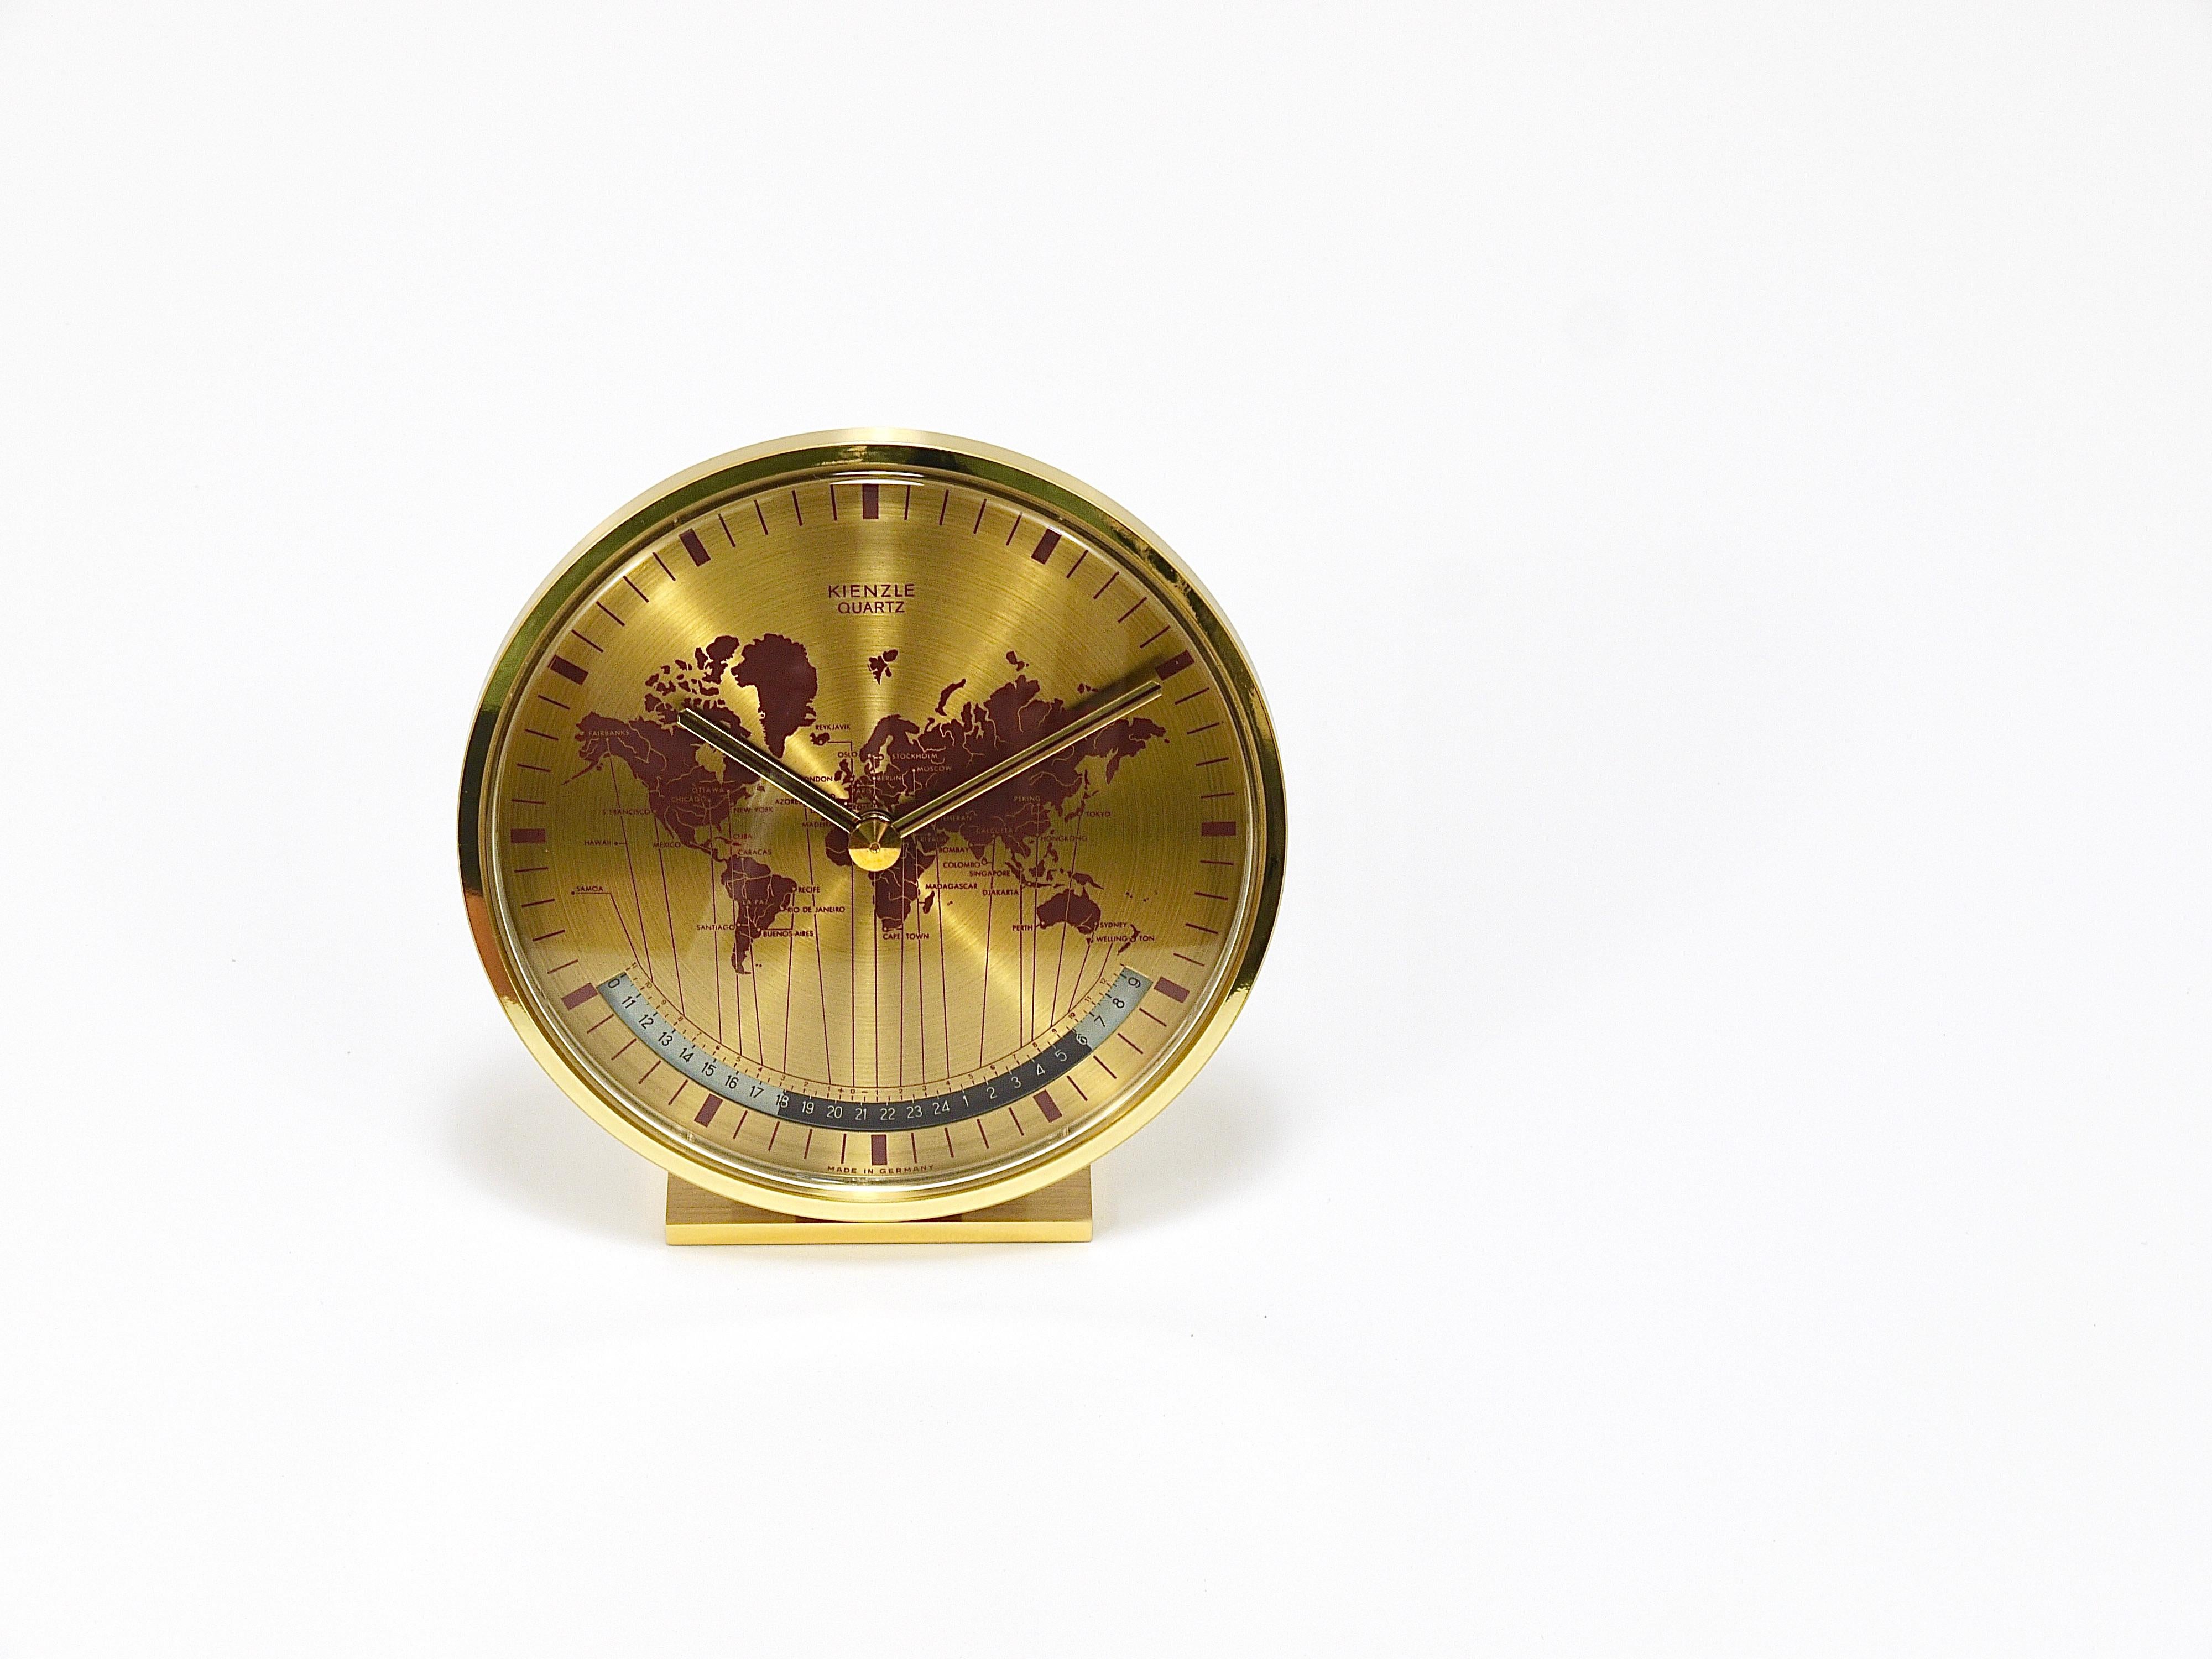 Kienzle GMT World Time Zone Brass Table Clock, Midcentury, Germany, 1960s For Sale 1